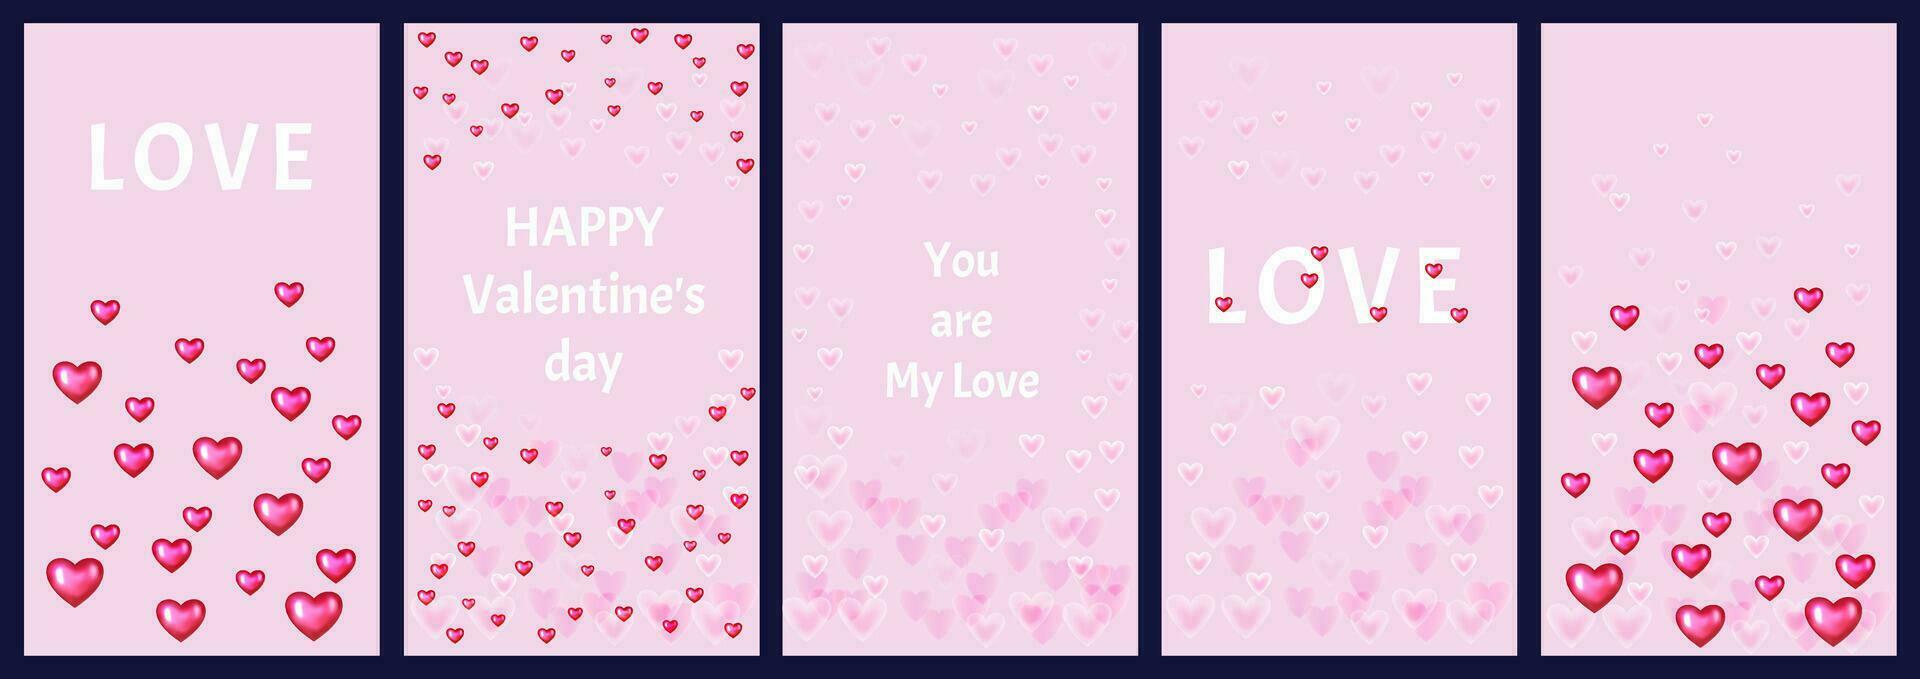 Collage bright simple stories templates. Set Happy Valentines day, love, you are my love. Set of festive vector illustration templates with bright hearts. Graphics suitable for use for banner